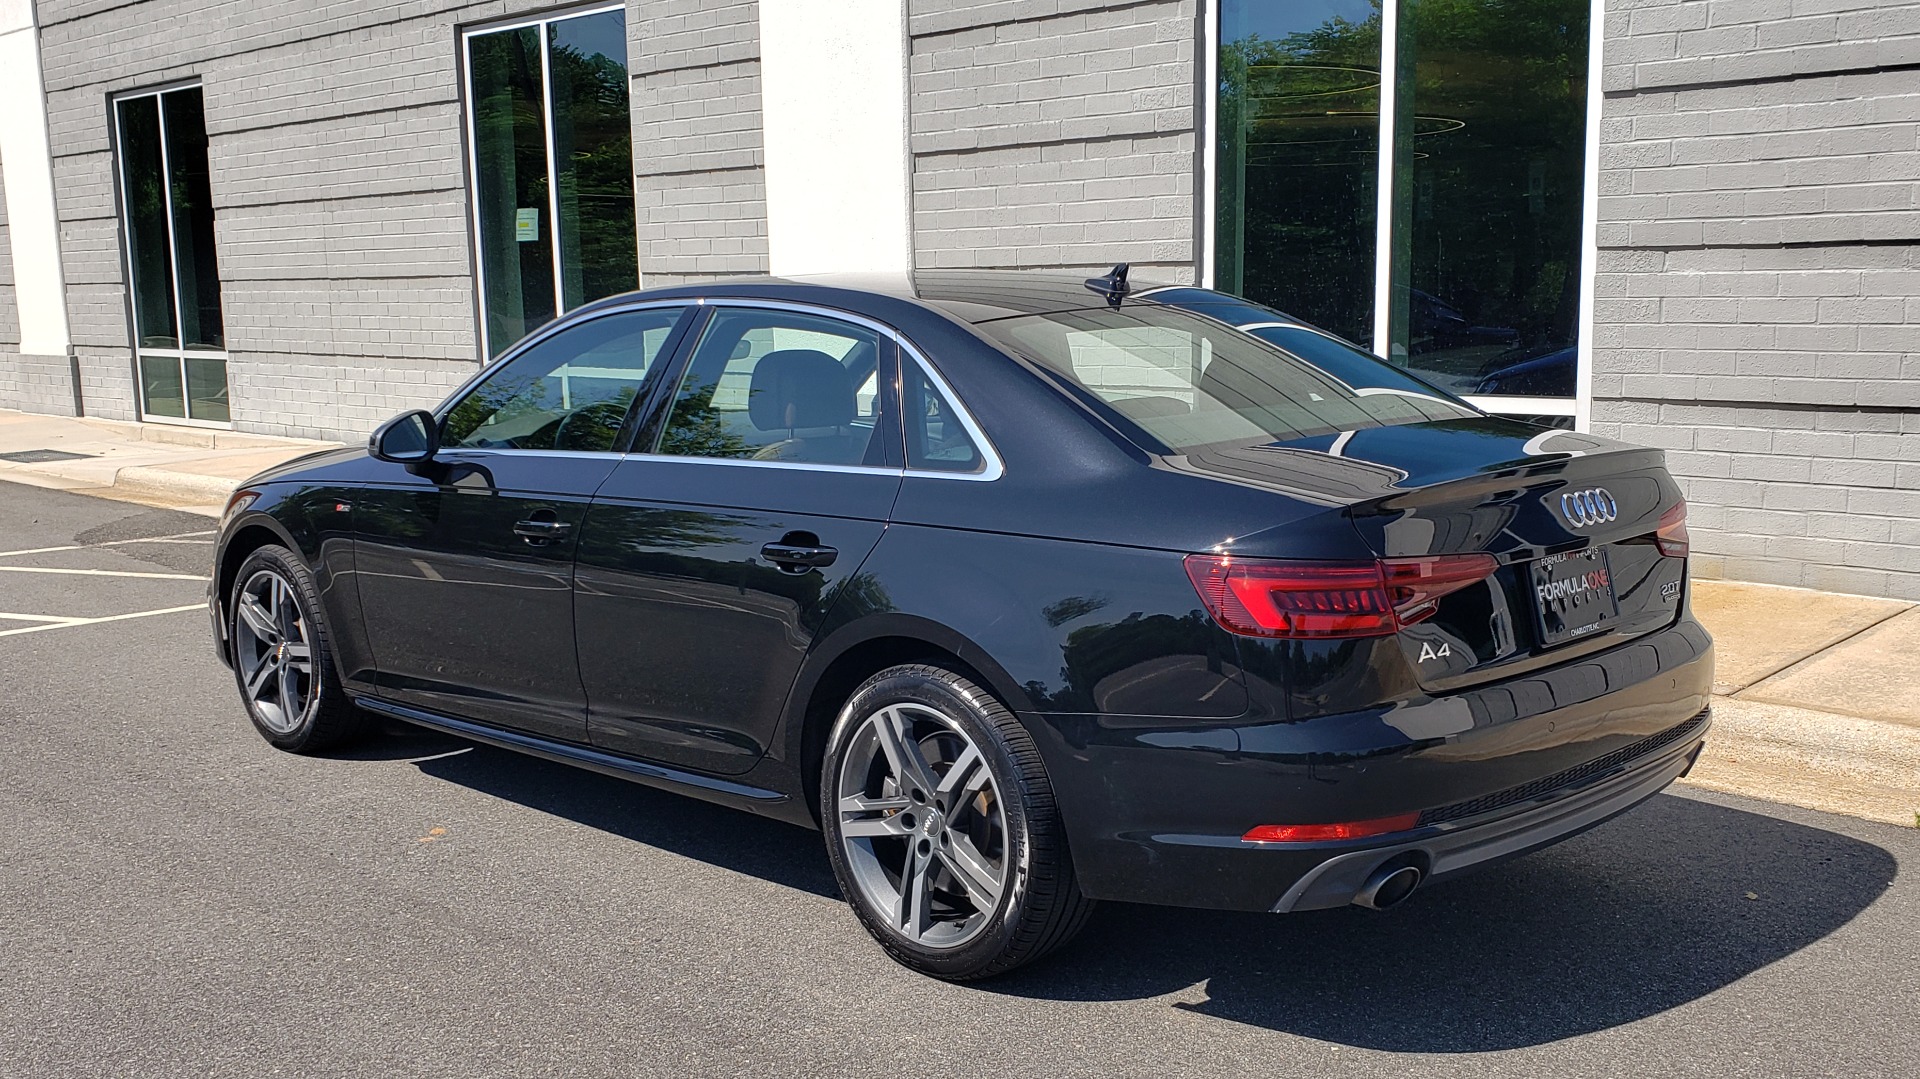 Used 2018 Audi A4 PREMIUM PLUS 2.0T / NAV / SUNROOF / B&O SND / CLD WTHR / REARVIEW for sale Sold at Formula Imports in Charlotte NC 28227 5